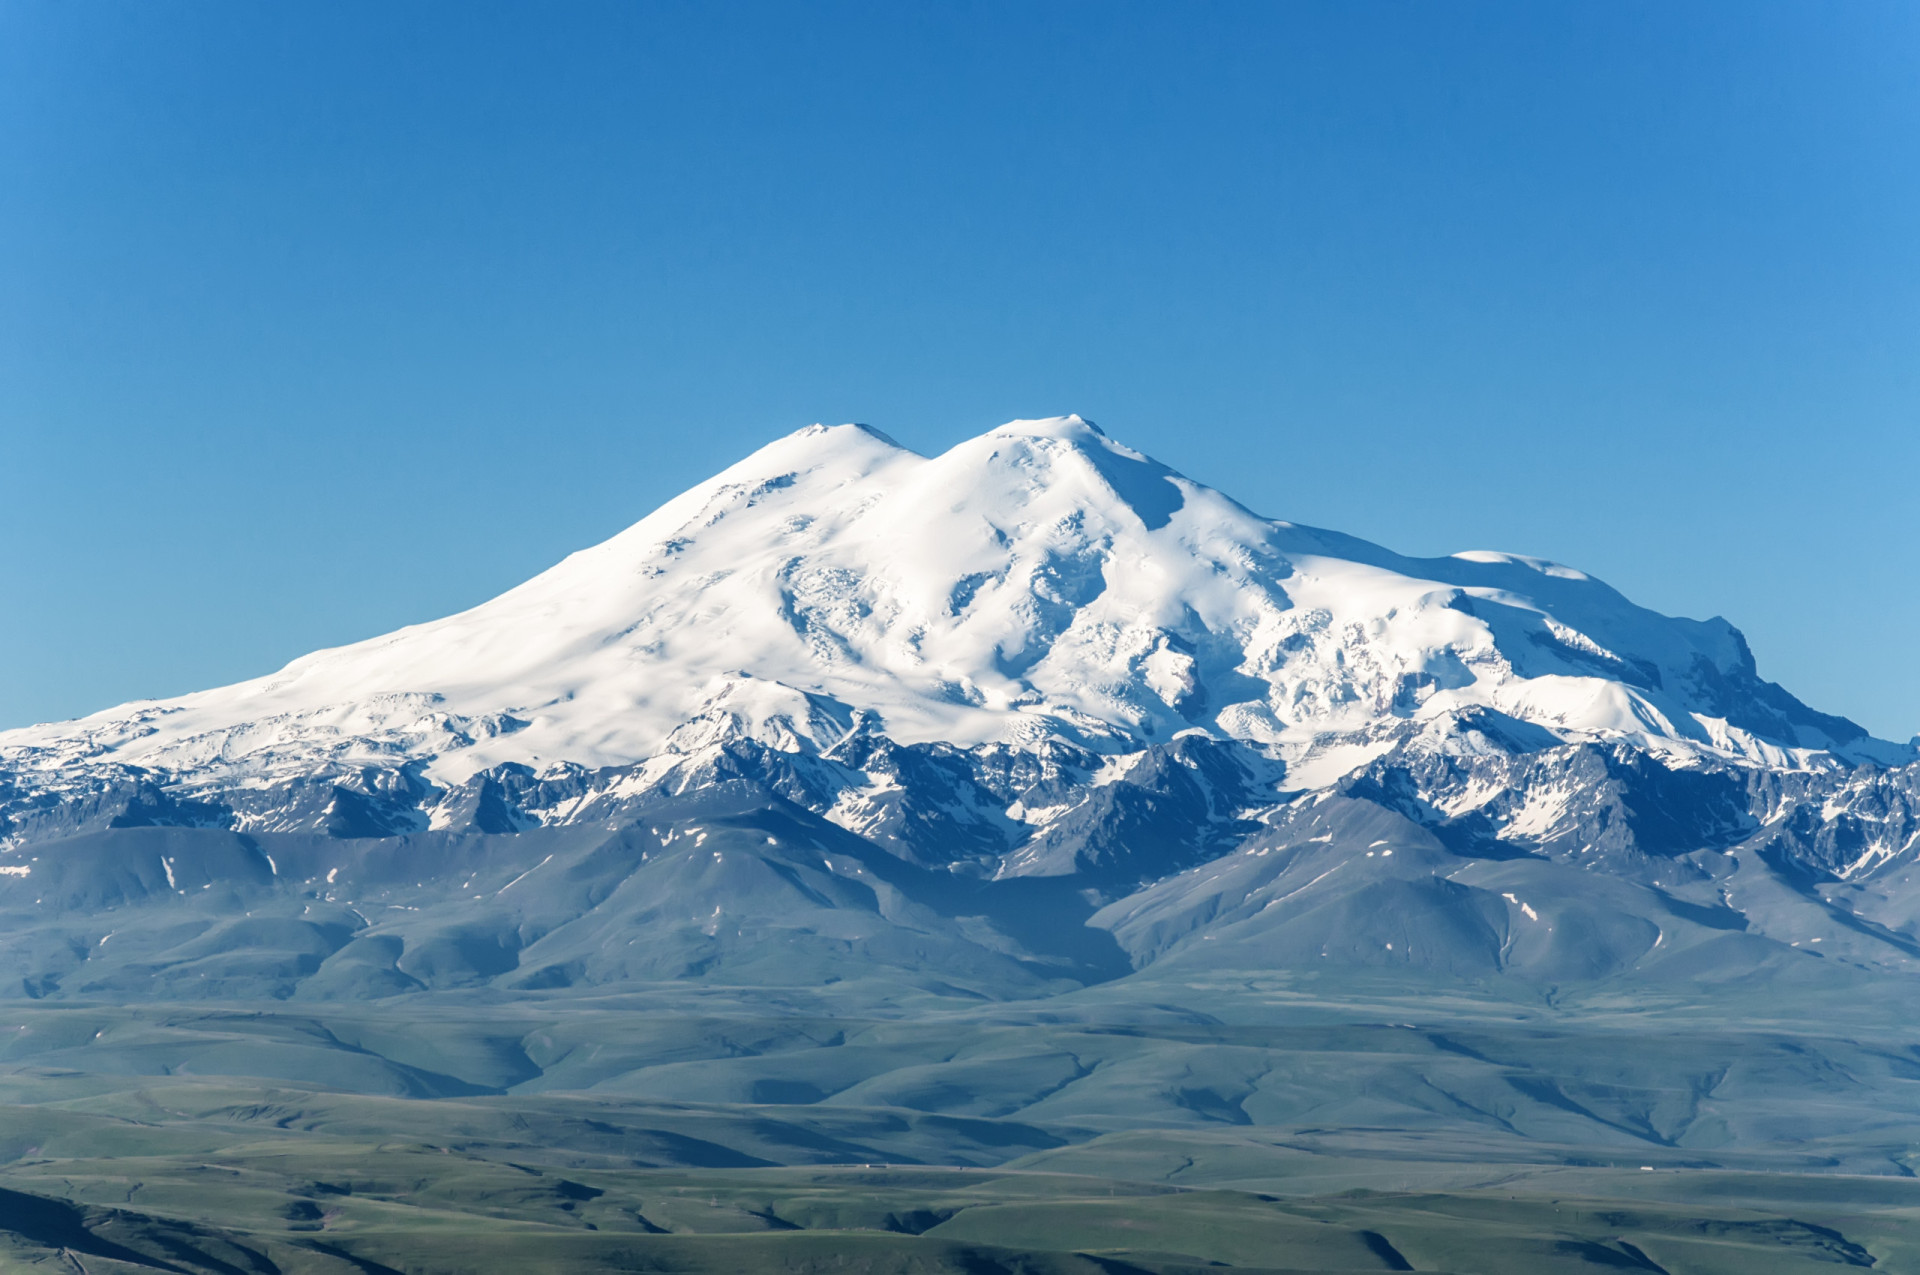 <p>Looming large in the Caucasus Mountains is Mount Elbrus, the highest mountain in Russia and Europe. A dormant volcano, Elbrus rises 18,510 feet (5,642 m) above sea level. It last erupted around 50 CE.</p><p>You may also like:<a href="https://www.starsinsider.com/n/266946?utm_source=msn.com&utm_medium=display&utm_campaign=referral_description&utm_content=701215en-us"> Greek mythology: the great Greek Gods and heroes </a></p>